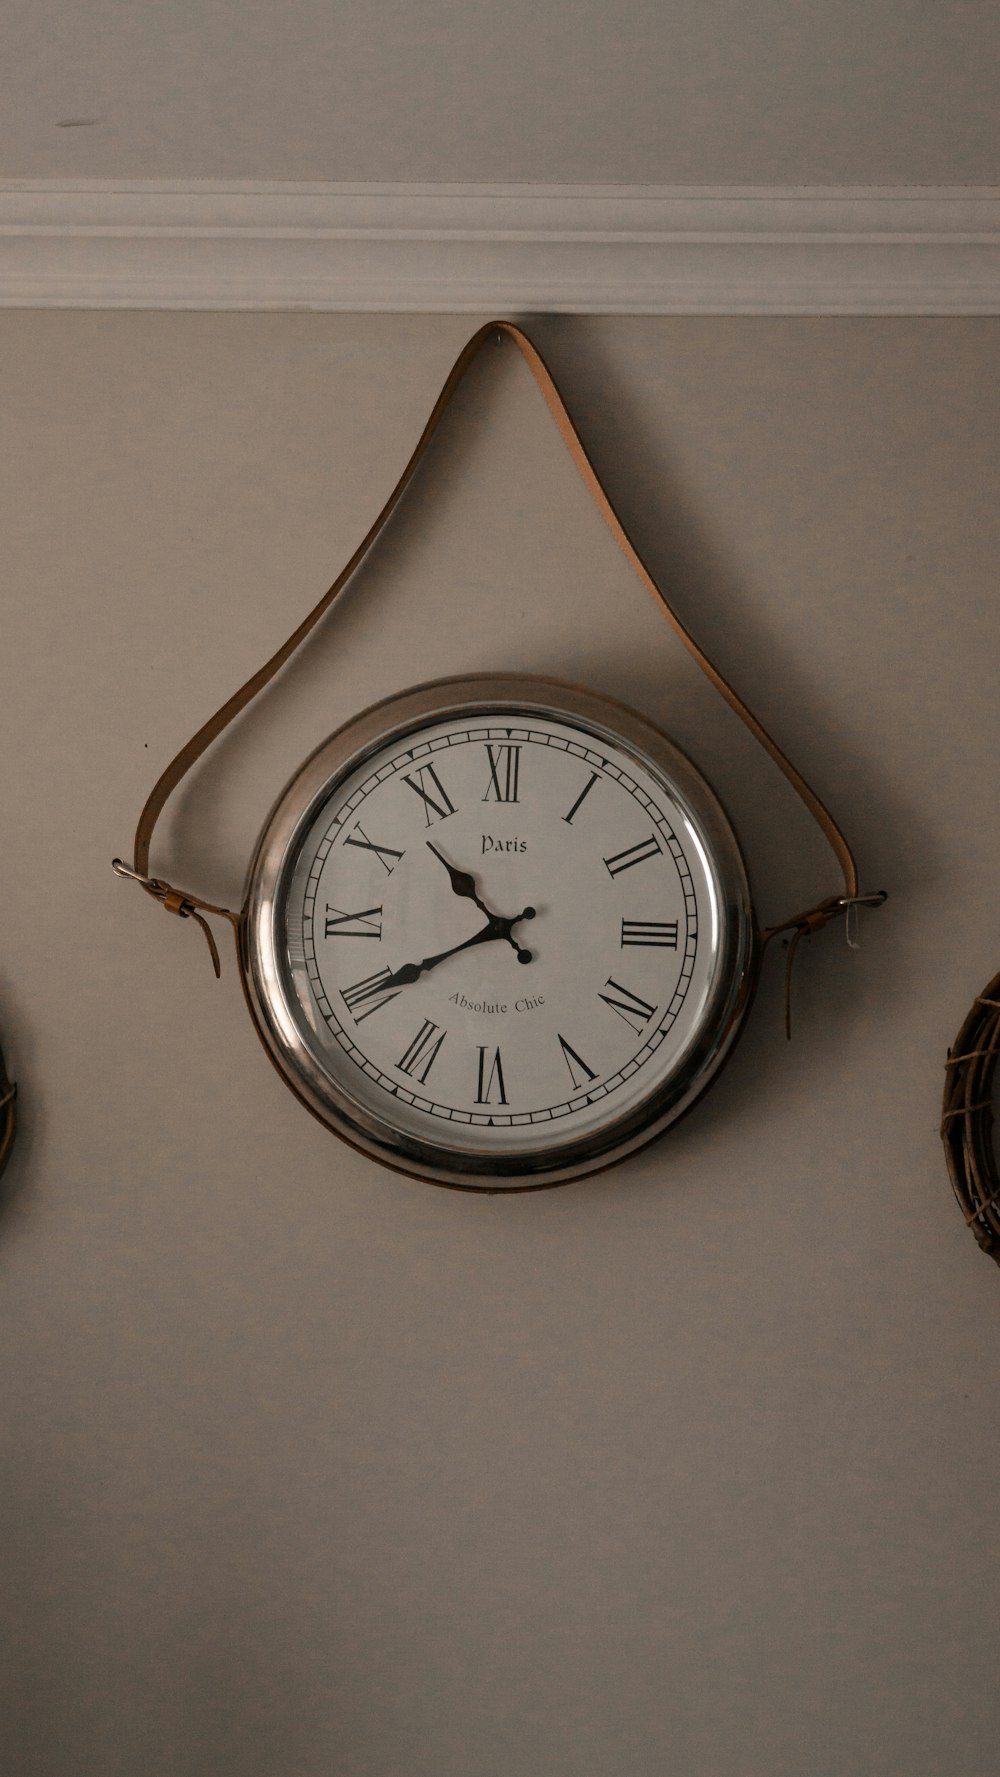 a clock hanging on the wall next to two clocks